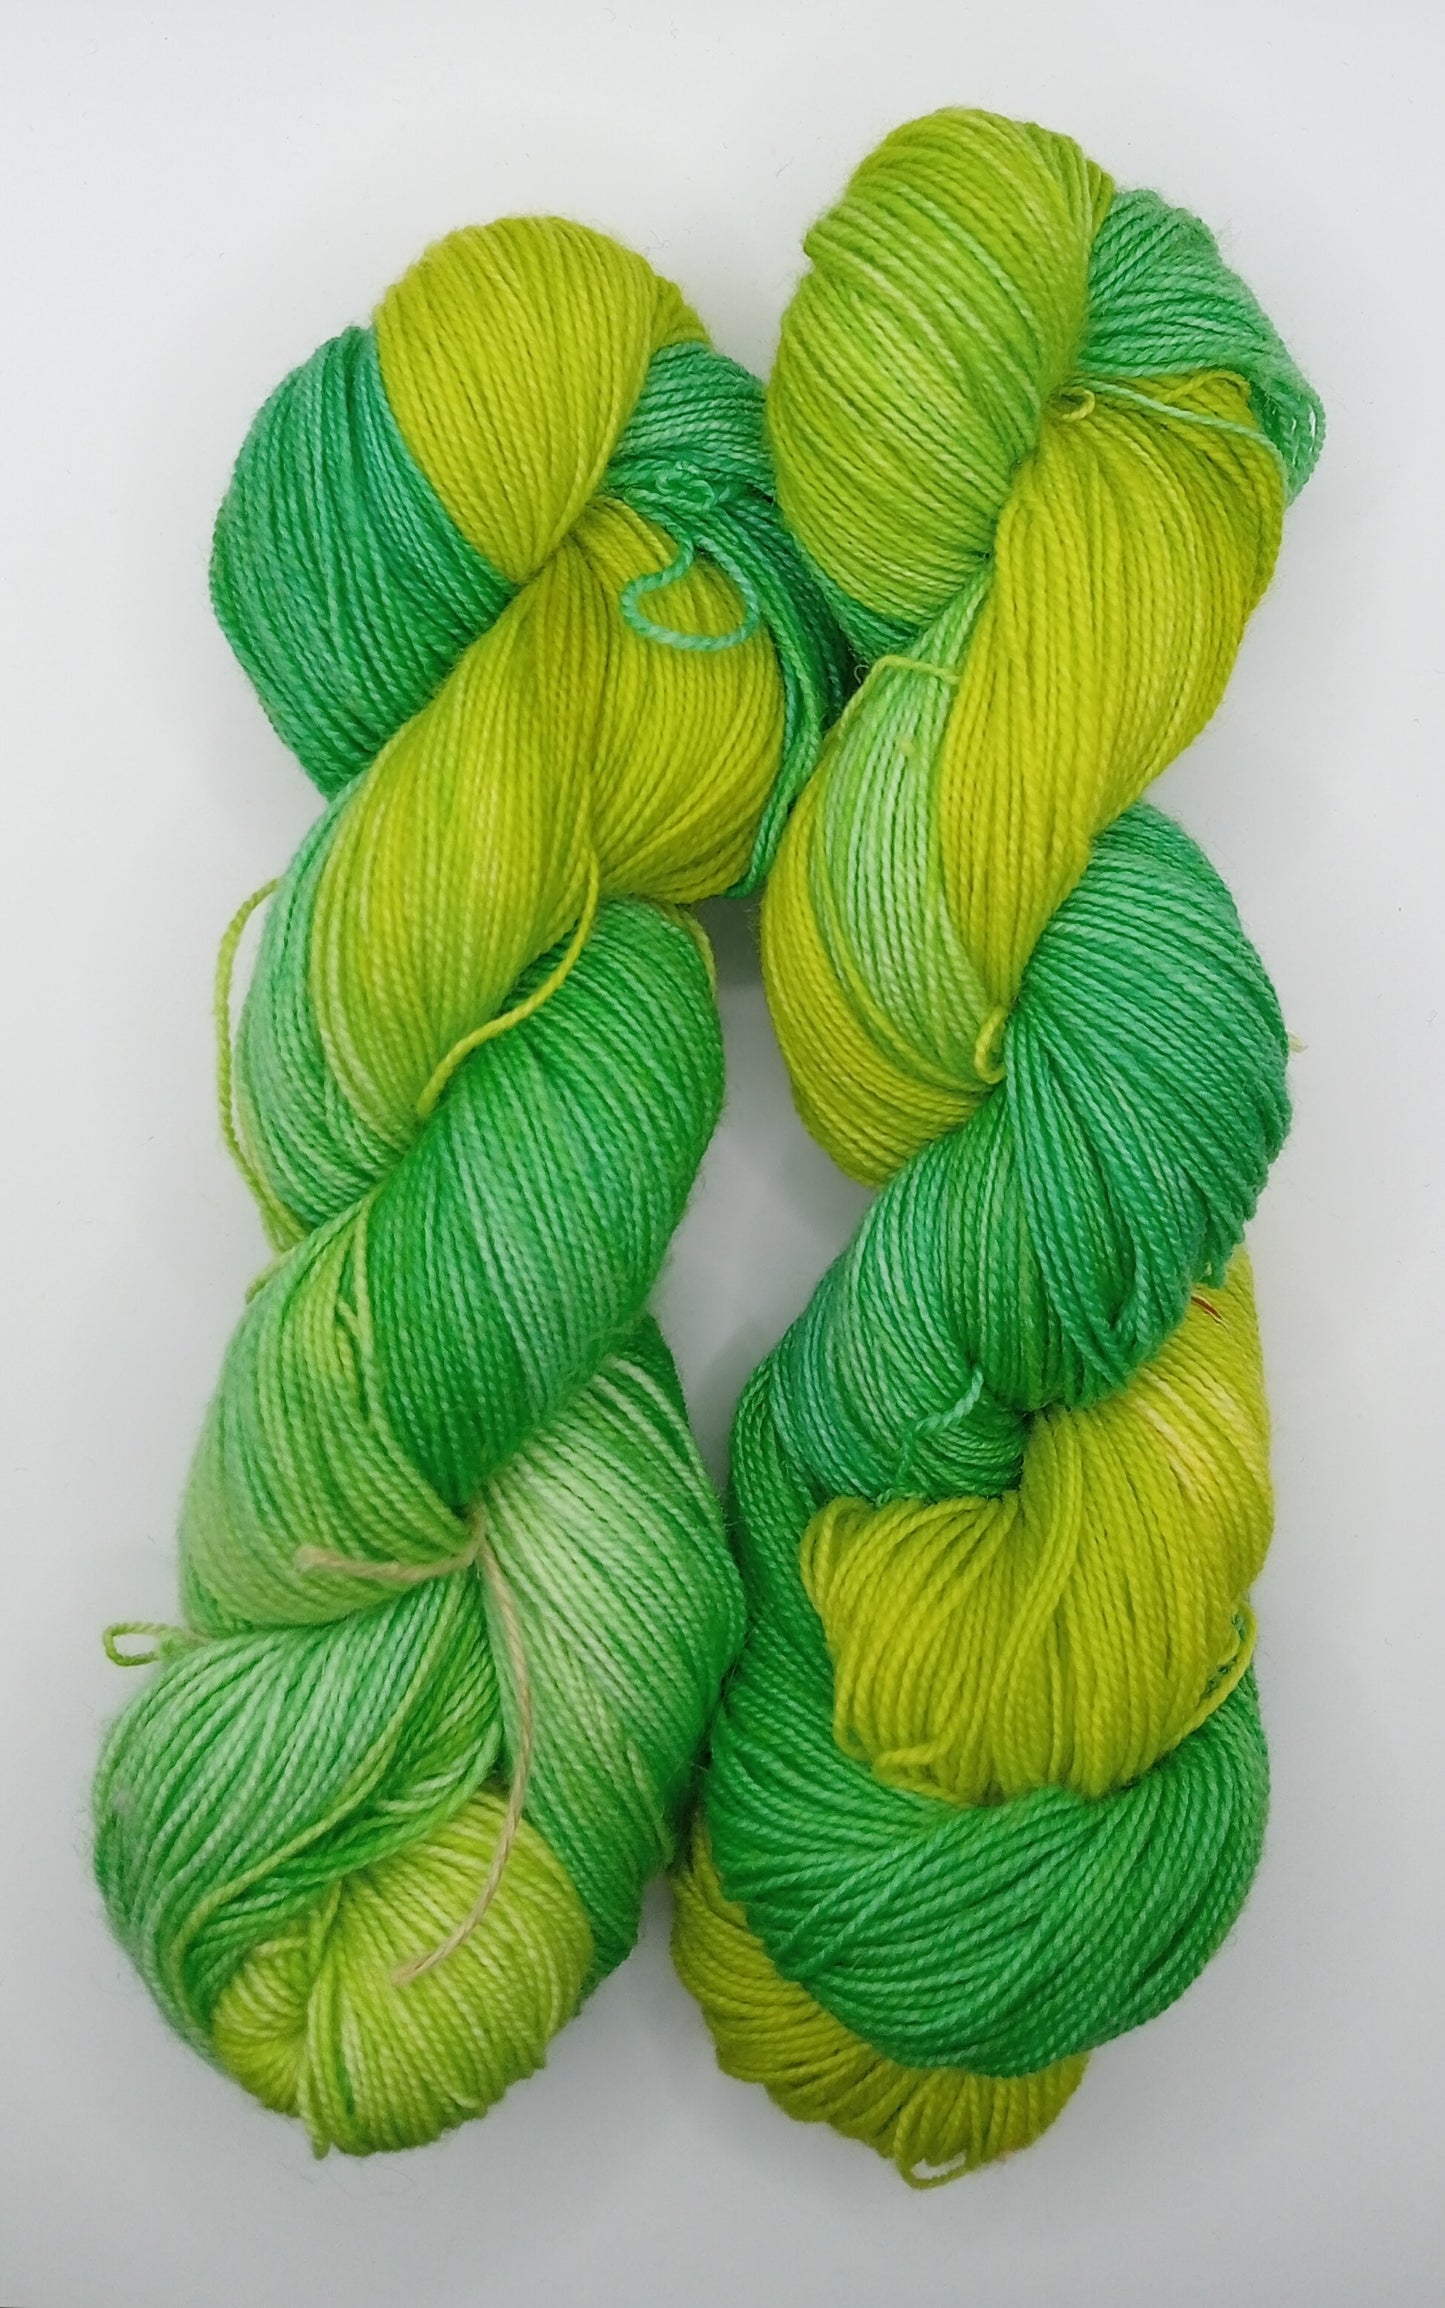 100G hand dyed Bluefaced Leicester/Nylon High Twist sock yarn - "Lime sorbet"